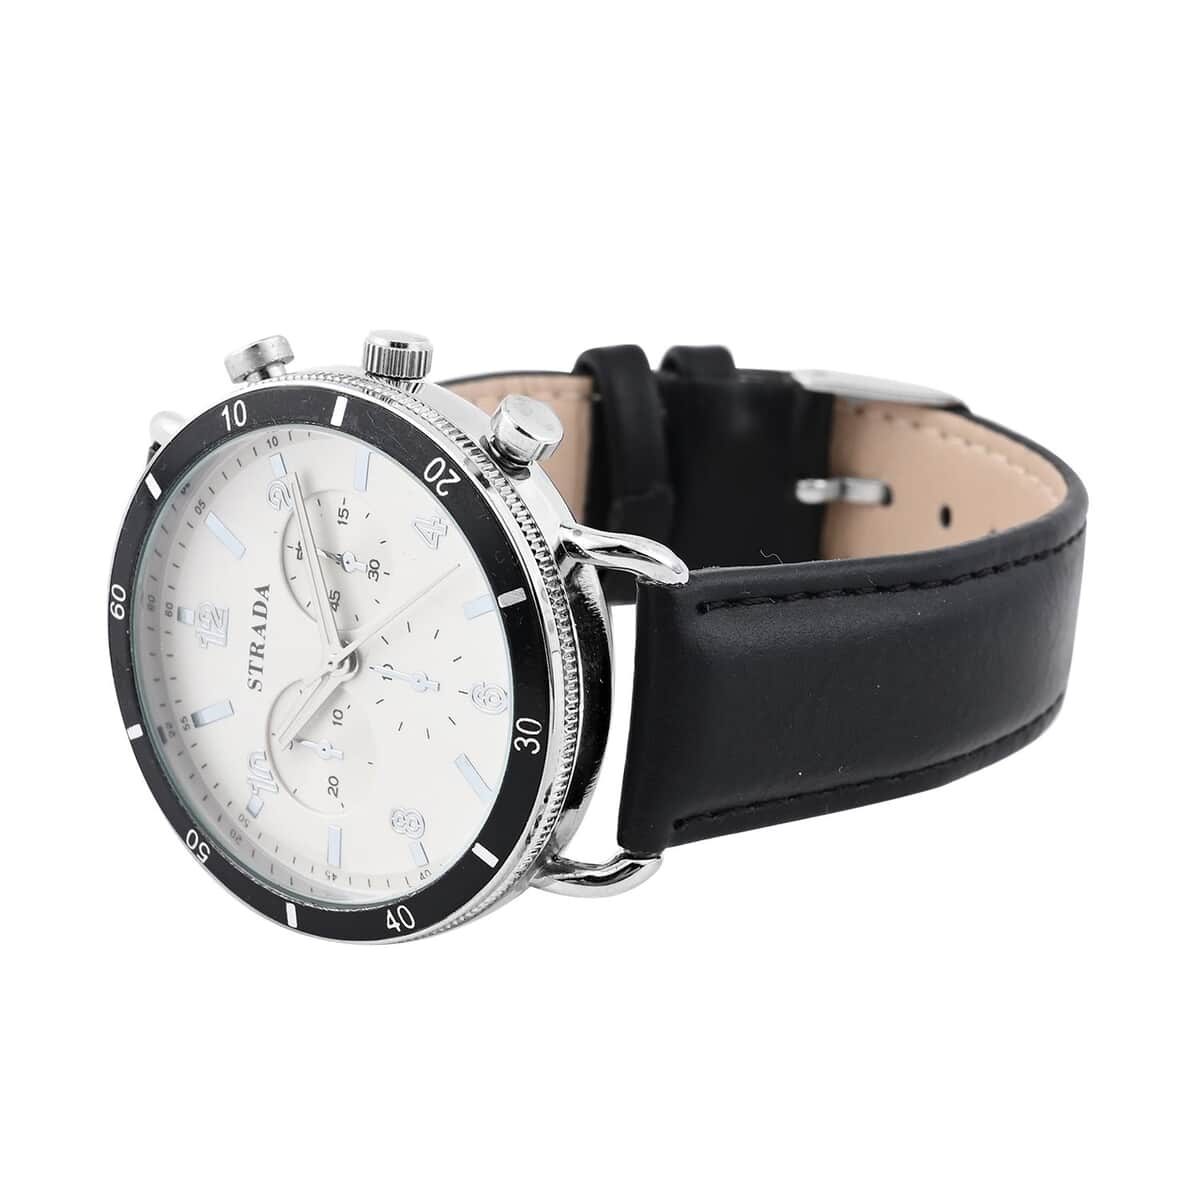 Strada Japanese Movement Stylish Dress Watch with Black Faux Leather Strap (42.2mm) (8.0-9.0Inches) image number 4